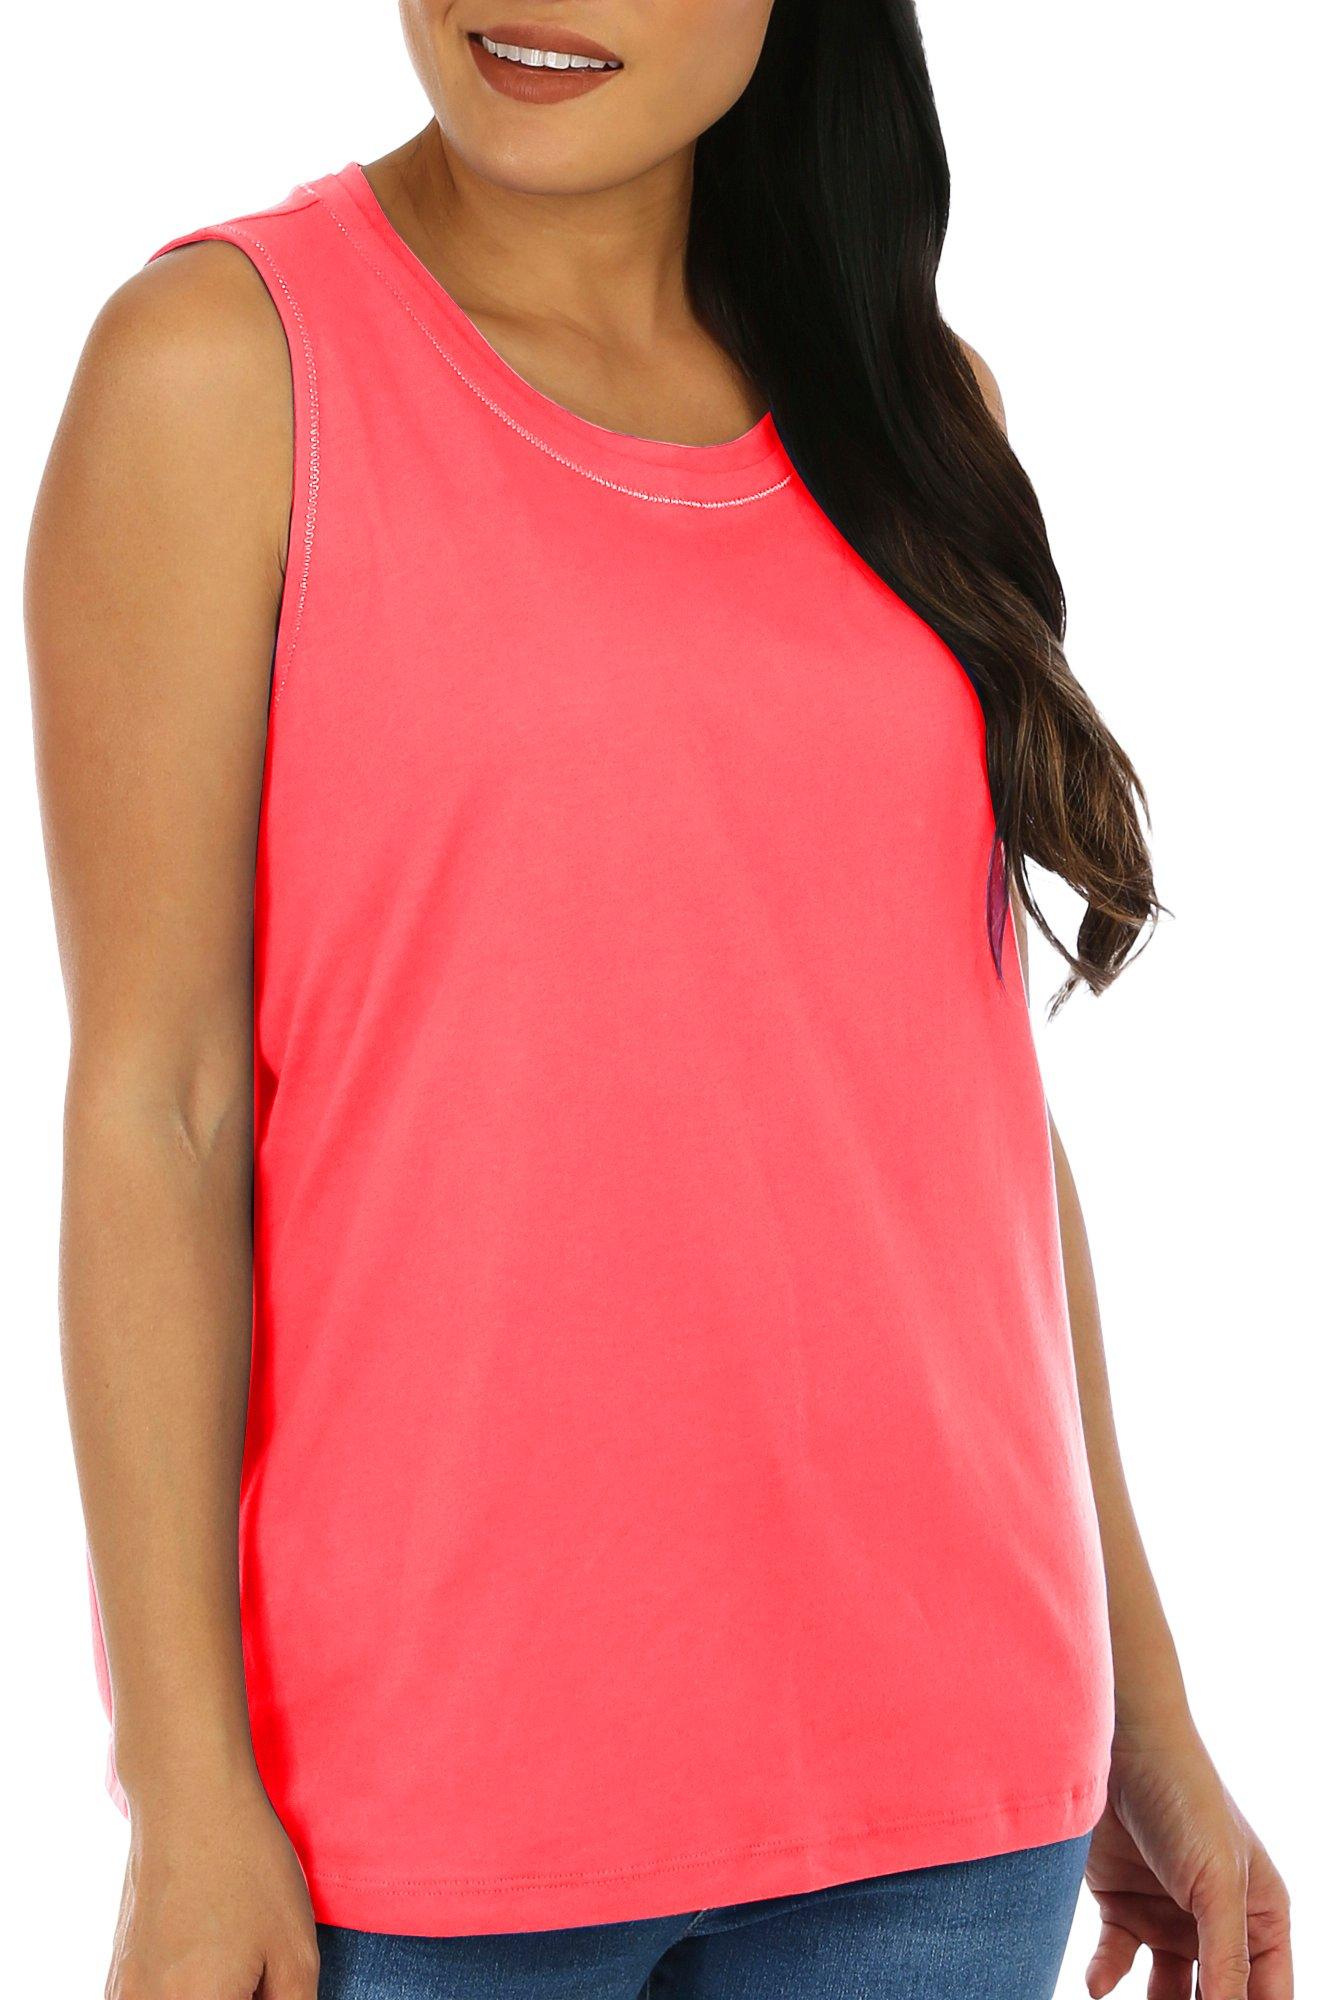 Coral Bay Womens Solid Embellished Round Neck Tank Top